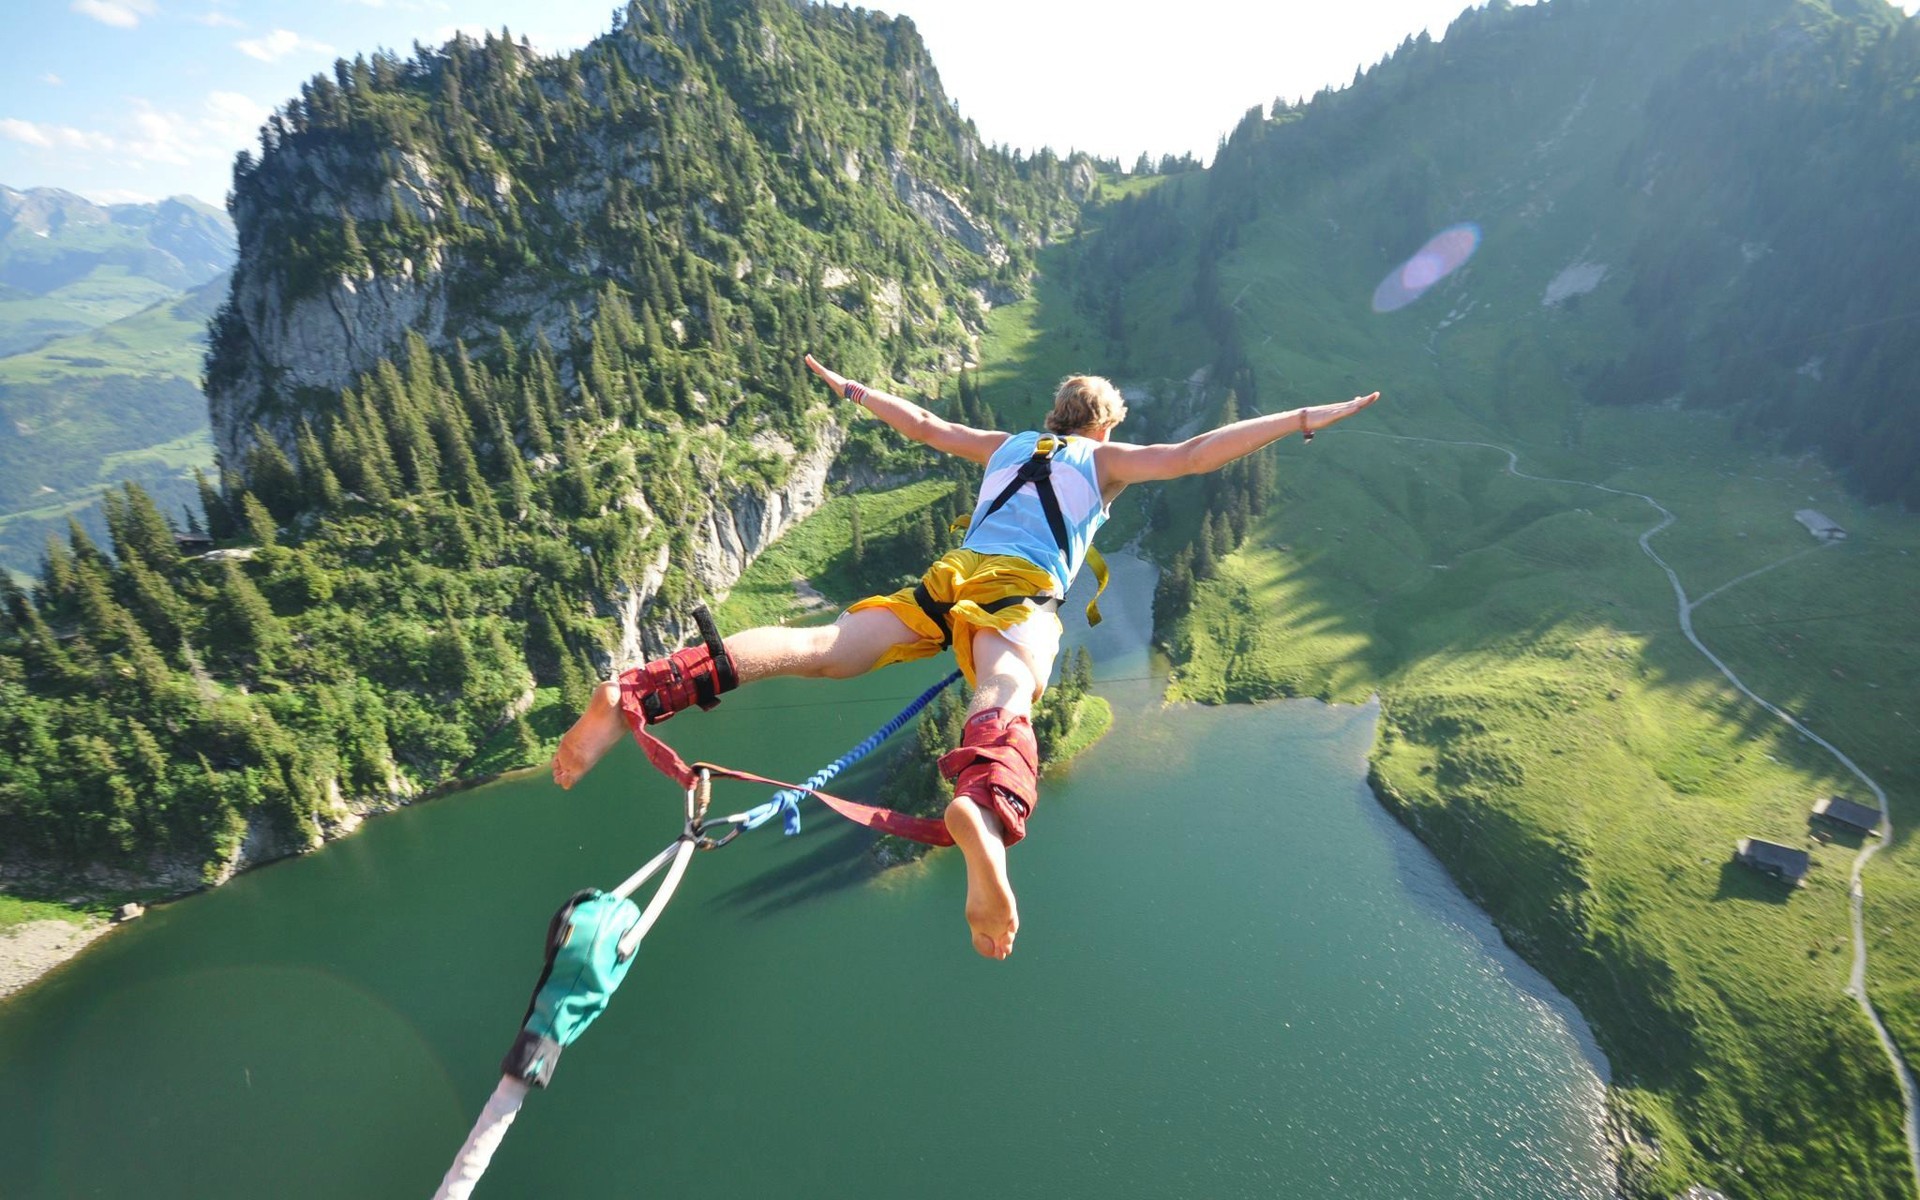 People 1920x1200 mountains jumping trees men men outdoors nature water sport landscape